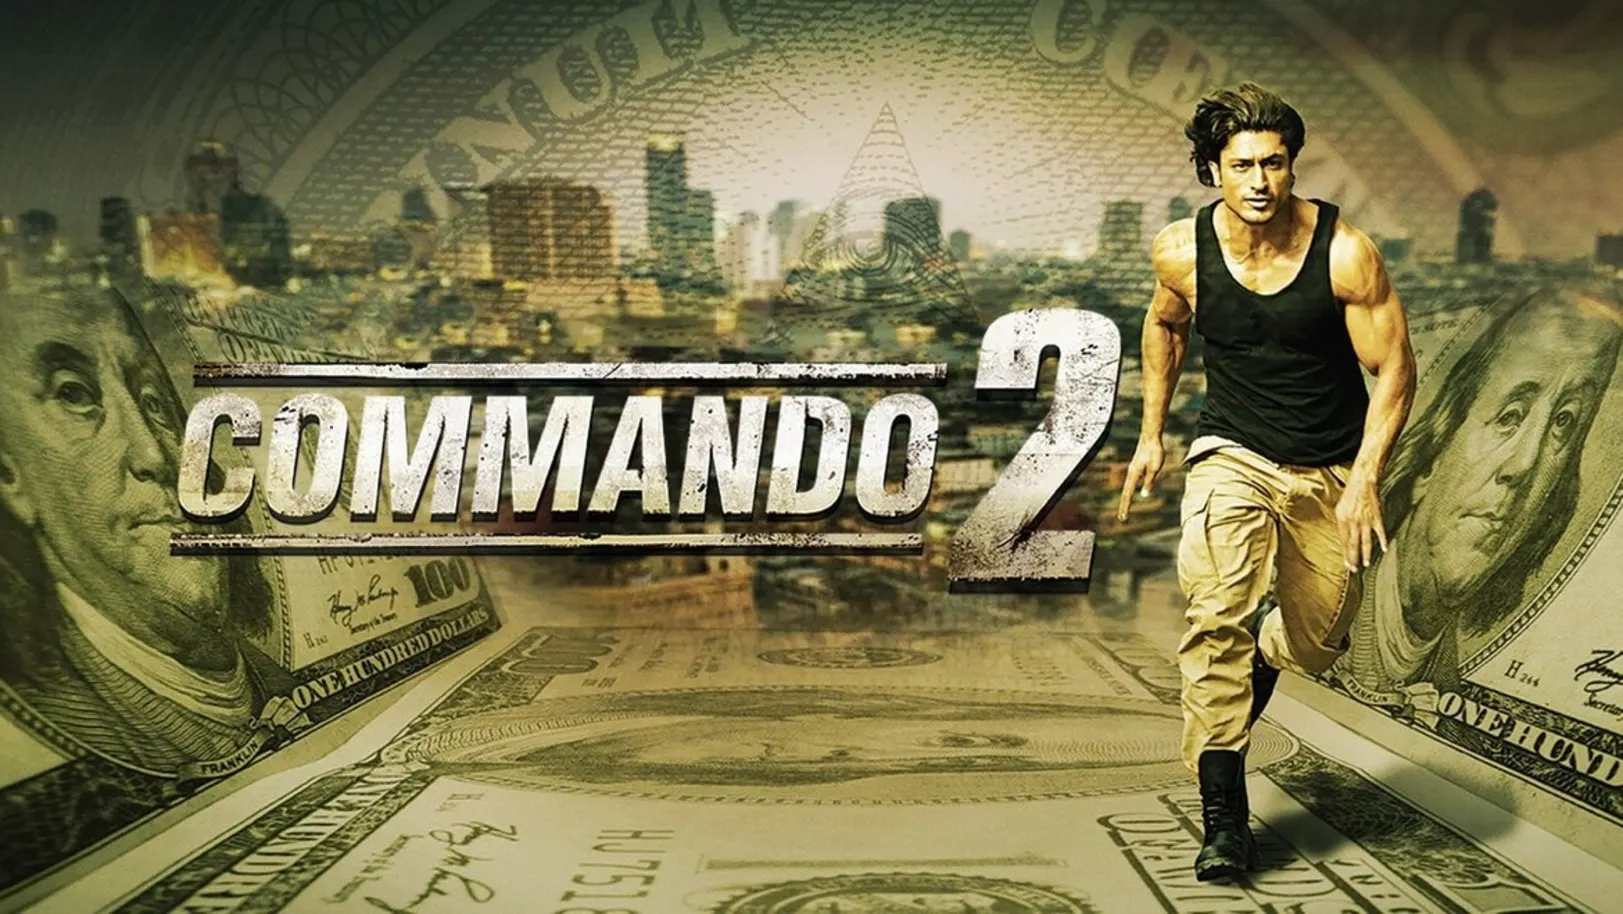 Commando 2 Streaming Now On &Pictures